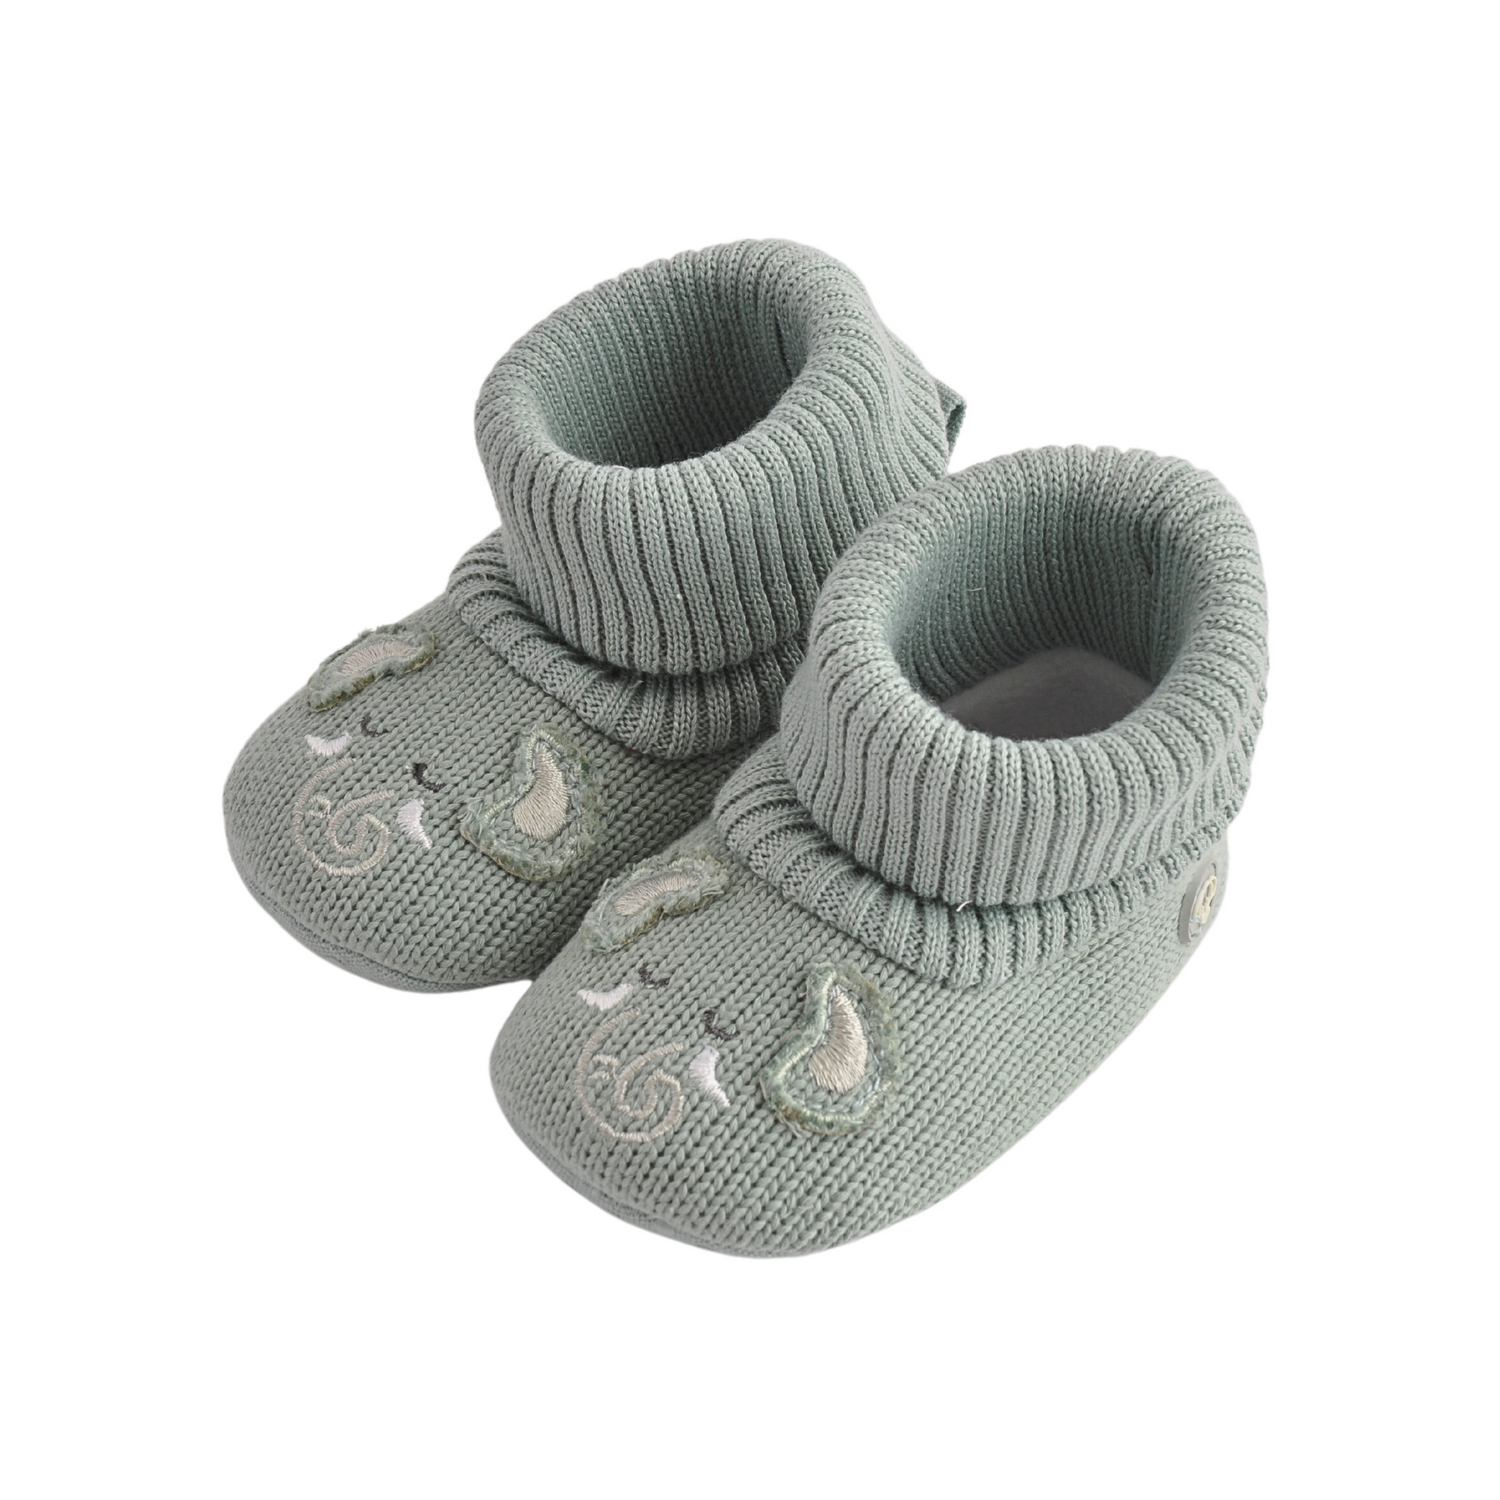 Kids & Baby - Baby Wear - Shoes